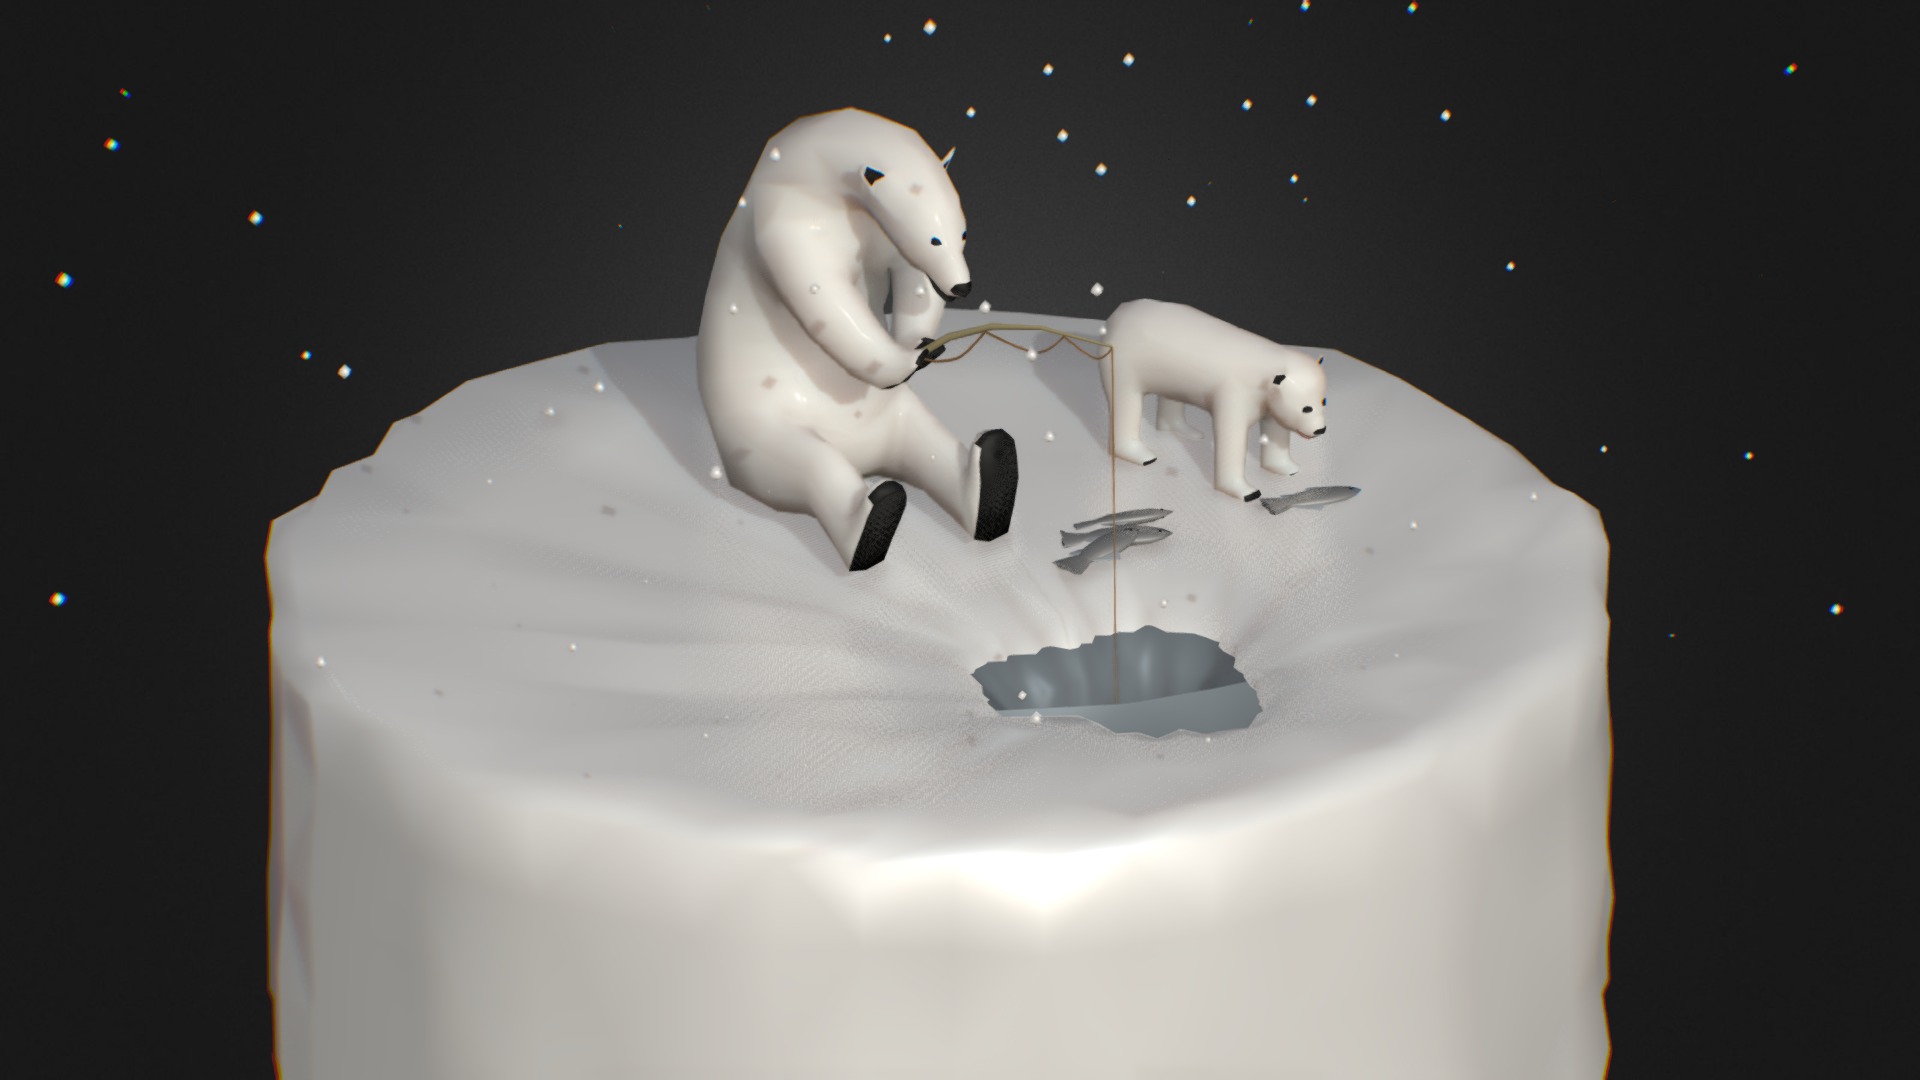 3D model Polar fishing - This is a 3D model of the Polar fishing. The 3D model is about a white cake with a couple of penguins on top.